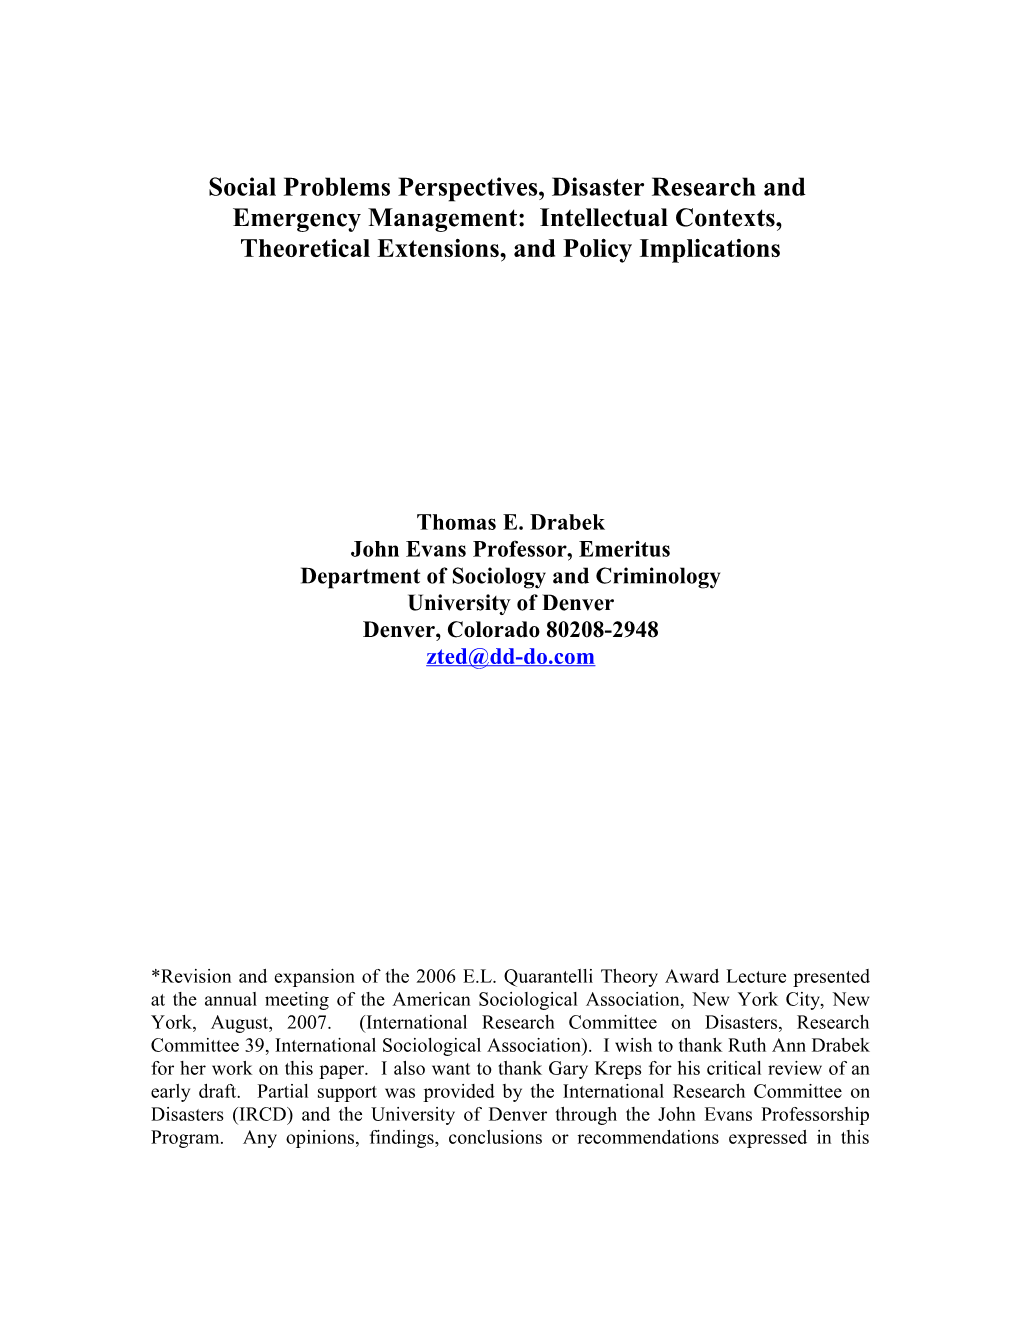 Social Problems Perspectives, Disaster Research And